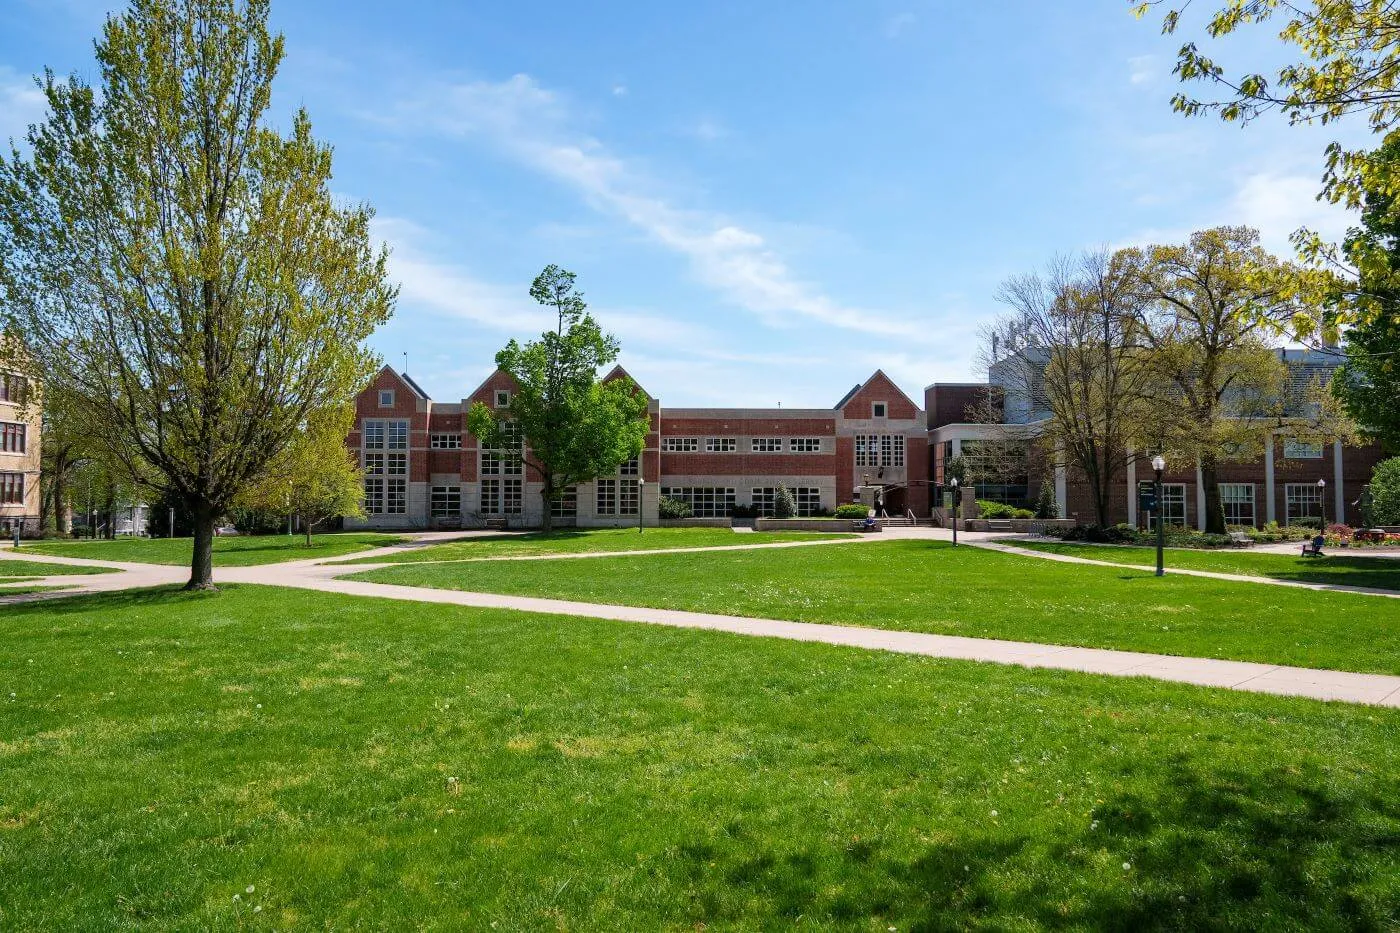 Exterior of Bishop Library and campus quad in spring